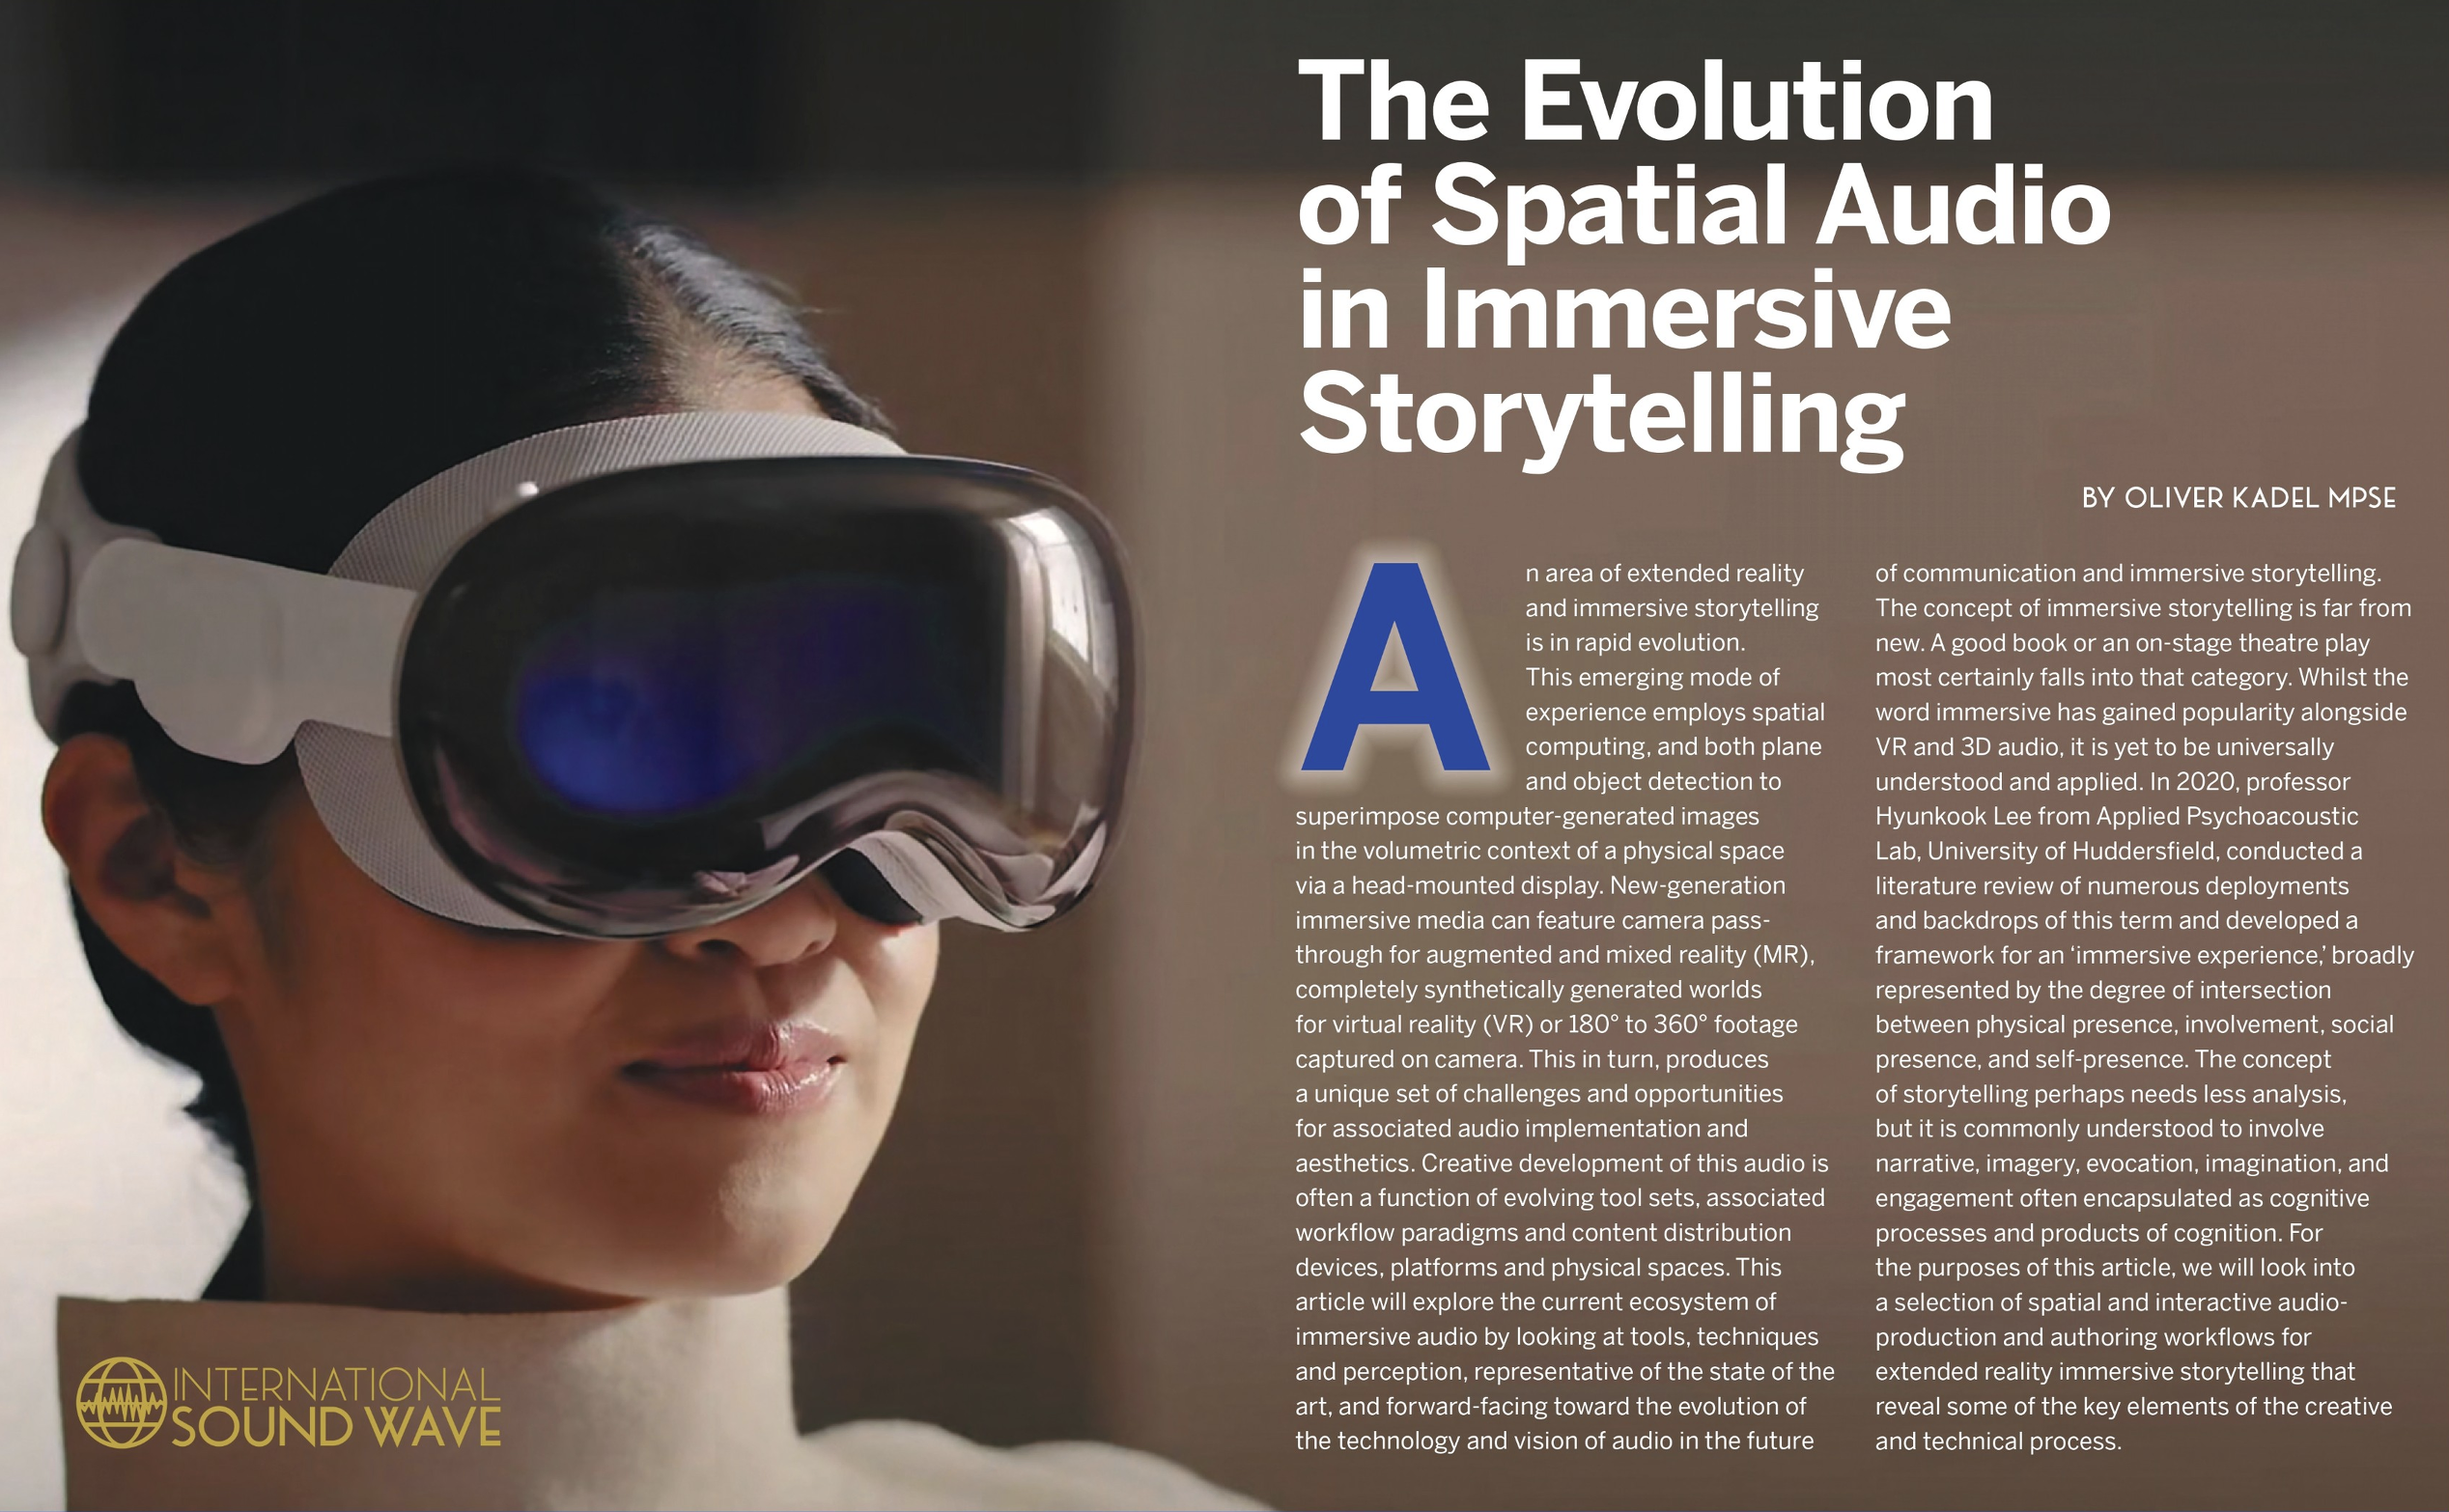 “The Evolution of Spatial Audio in Immersive Storytelling” for the latest edition of MPSE’s Wavelength magazine.